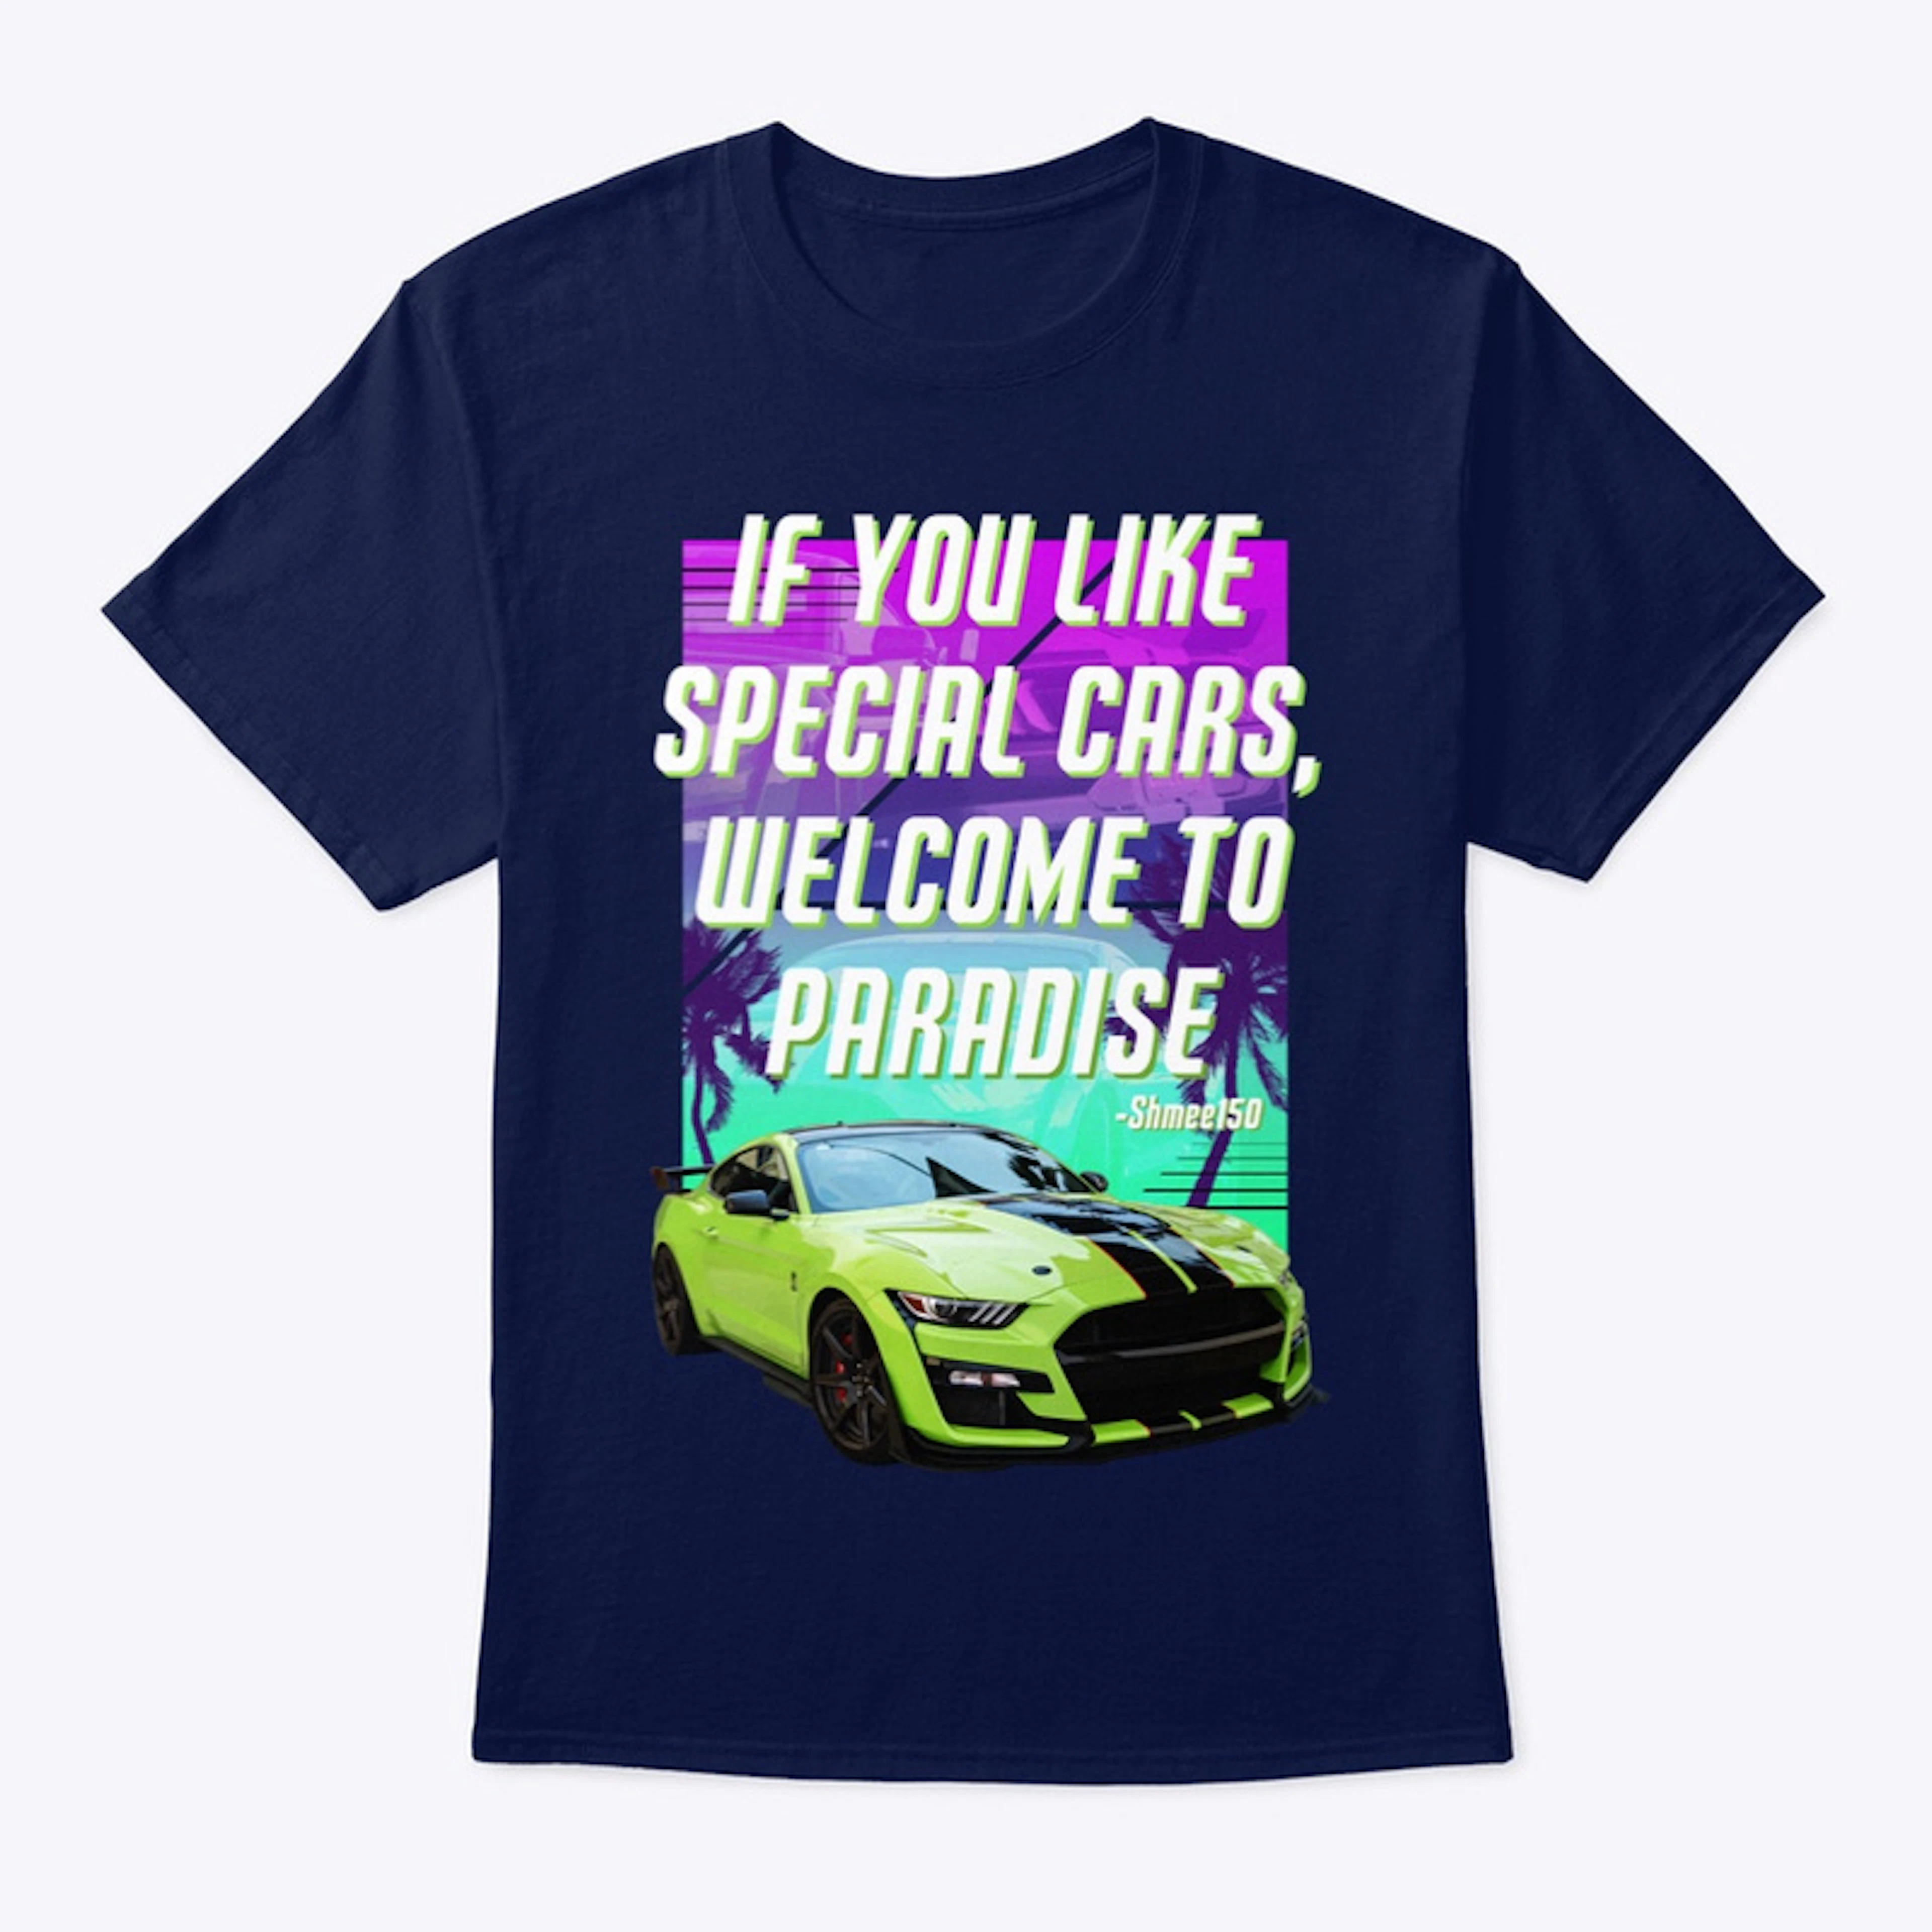 If you like special cars...